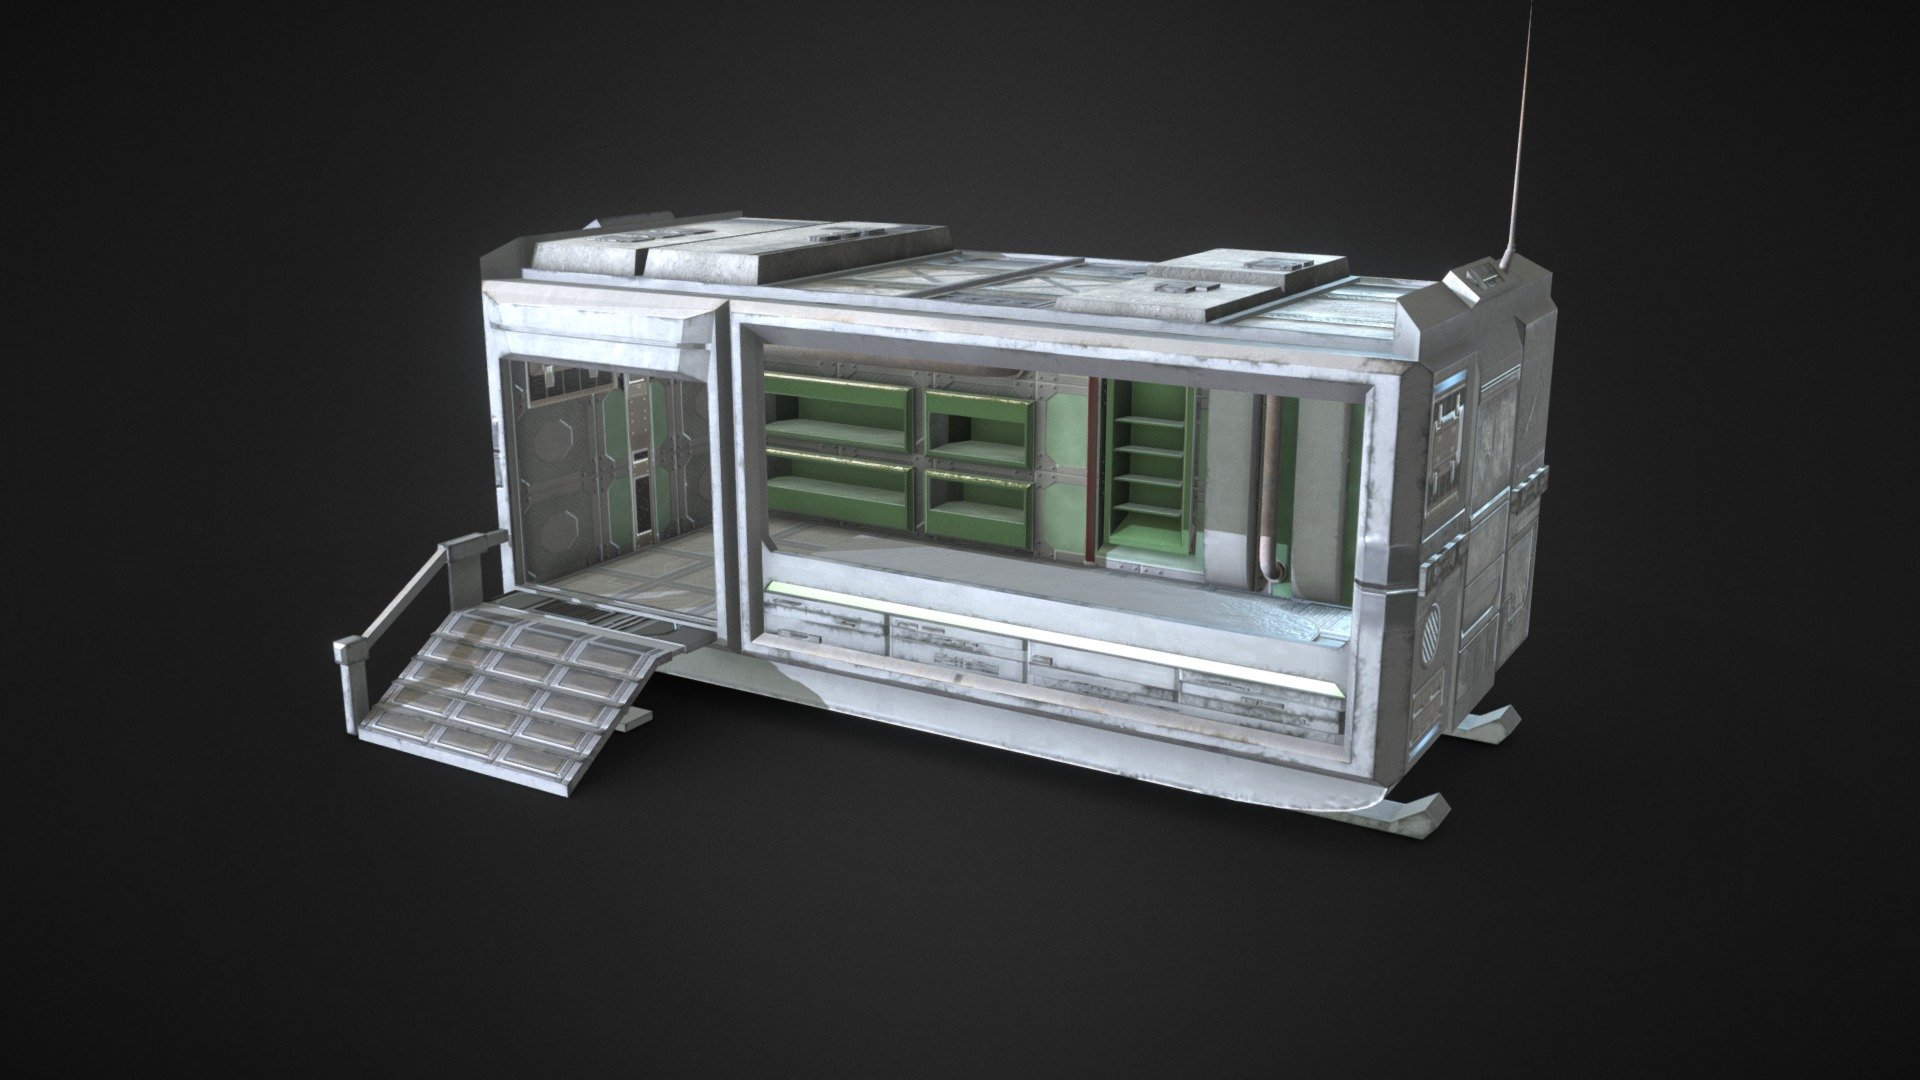 3D model of GAME READY Sci-Fi modular building, inspired by Mass Effect.
Best suited to the concept of a colony on an uncharted planet.
The model was made with a texture resolution of 4096x4096 (Lower resolution textures available too).

1) THE MODEL CONSISTS OF:




2254 Polys;

4800 Tris;

4957 Edges;

2717 Verts;

4K Textures (AlbedoM, NormalM, RoughnessM, MetalM, AO-M, EmmM);

2) FILE PROPERTIES:




Version: 2007 (Only .DXF), 2011 (.FBX and .DWG), 2013, 2016;

Render: V-Ray 5.10;

Formats: Max 2013, 3DS, .FBX, .OBJ (.MTL), .ABC, .DAE, .DWG, .DXF;

3) ADDITIONAL INFORMATION:

Software used:




3D modeling: 3ds Max 2016;

UV Mapping: 3ds Max 2016;

Painting / Texturing: Substance Painter &amp; Photoshop;

My system specifications:




CPU: Intel Core i5 8265U 1.60GHz;

GPU: GeForce MX230 2GB;

RAM: DDR3 8GB;

OS: Windows 10;

Whole scene setuped and fully ready to render in Vray. All materials setuped in Vray.
I wish you happiness and health!* - C3 - Sci-Fi Modular Building 1 - 3D model by jordnu 3d model